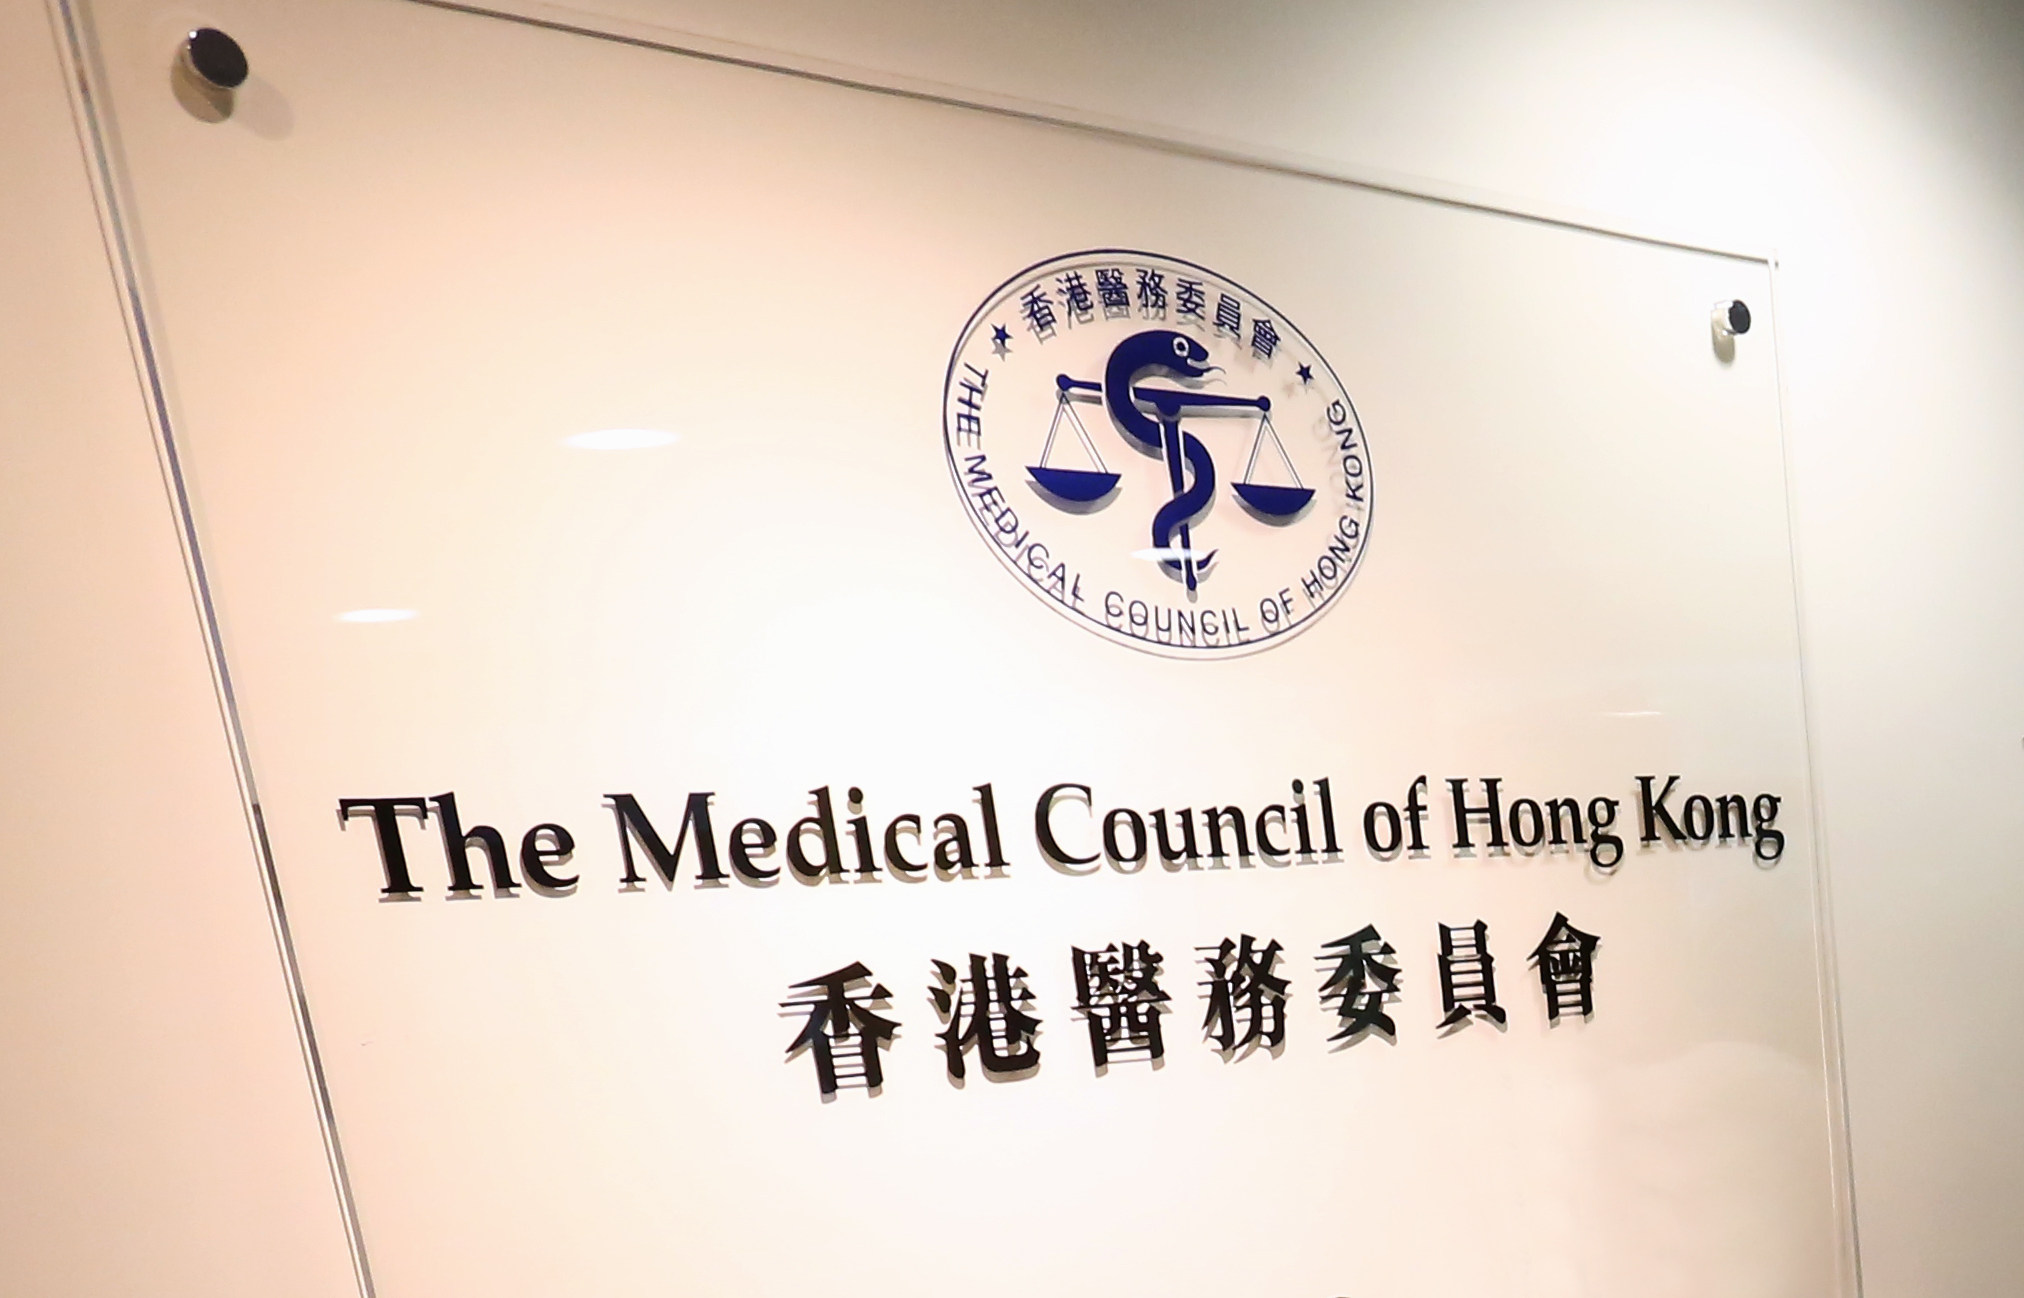 Hong Kong’s Medical Council has elected a specialist in obstetrics and gyynaecology as its new head, the first change at the top in almost 12 years. Photo: Jonathan Wong